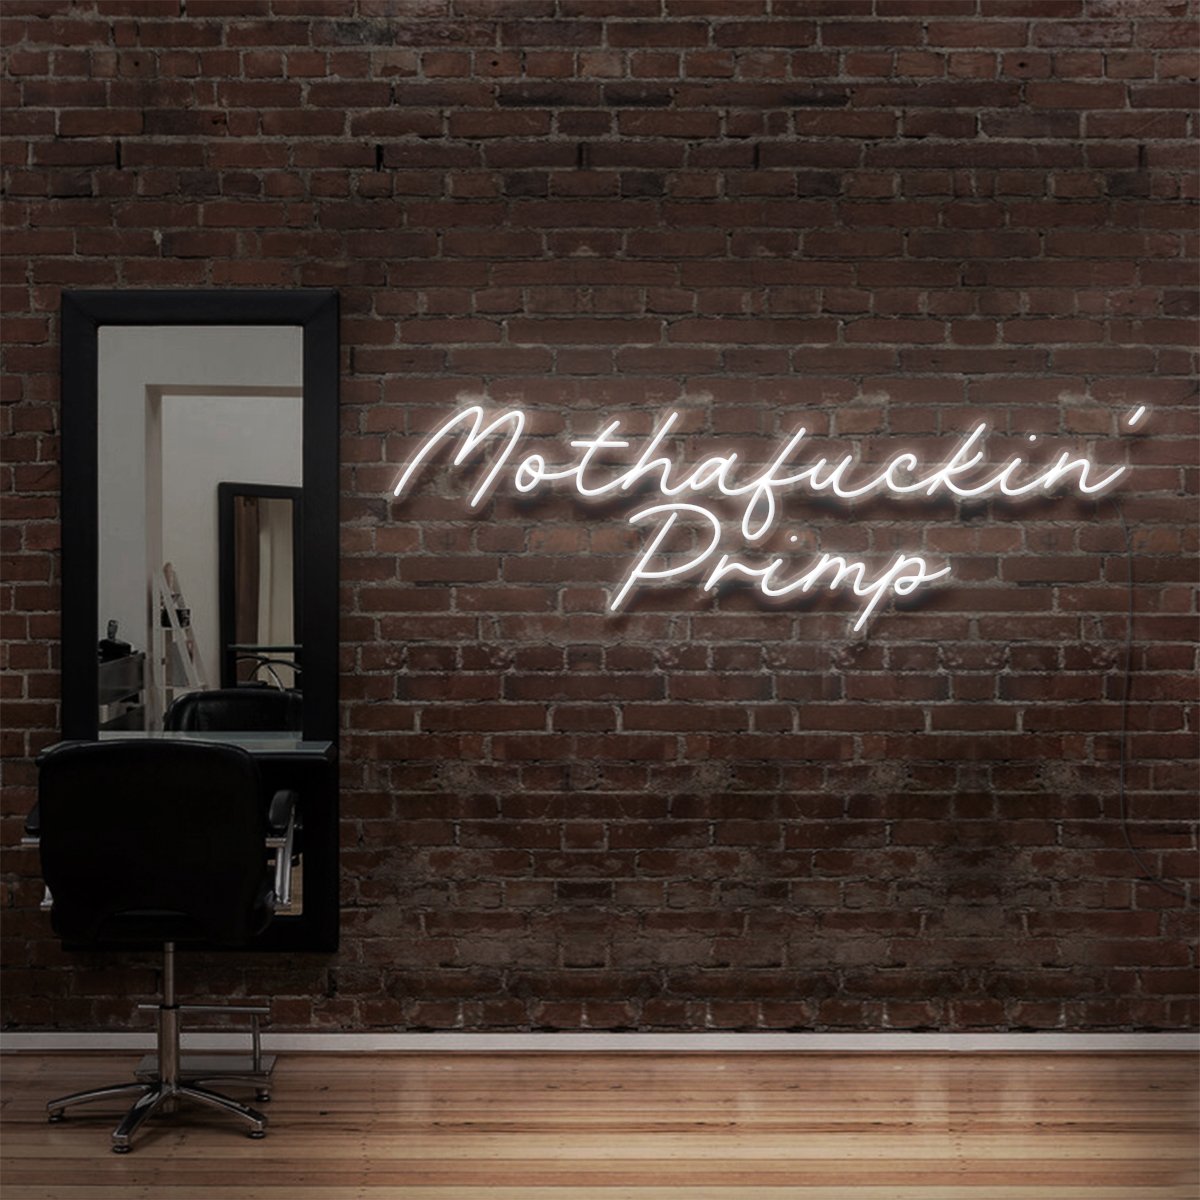 "Mothafuckin' Primp" Neon Sign for Hair Salons & Barbershops by Neon Icons